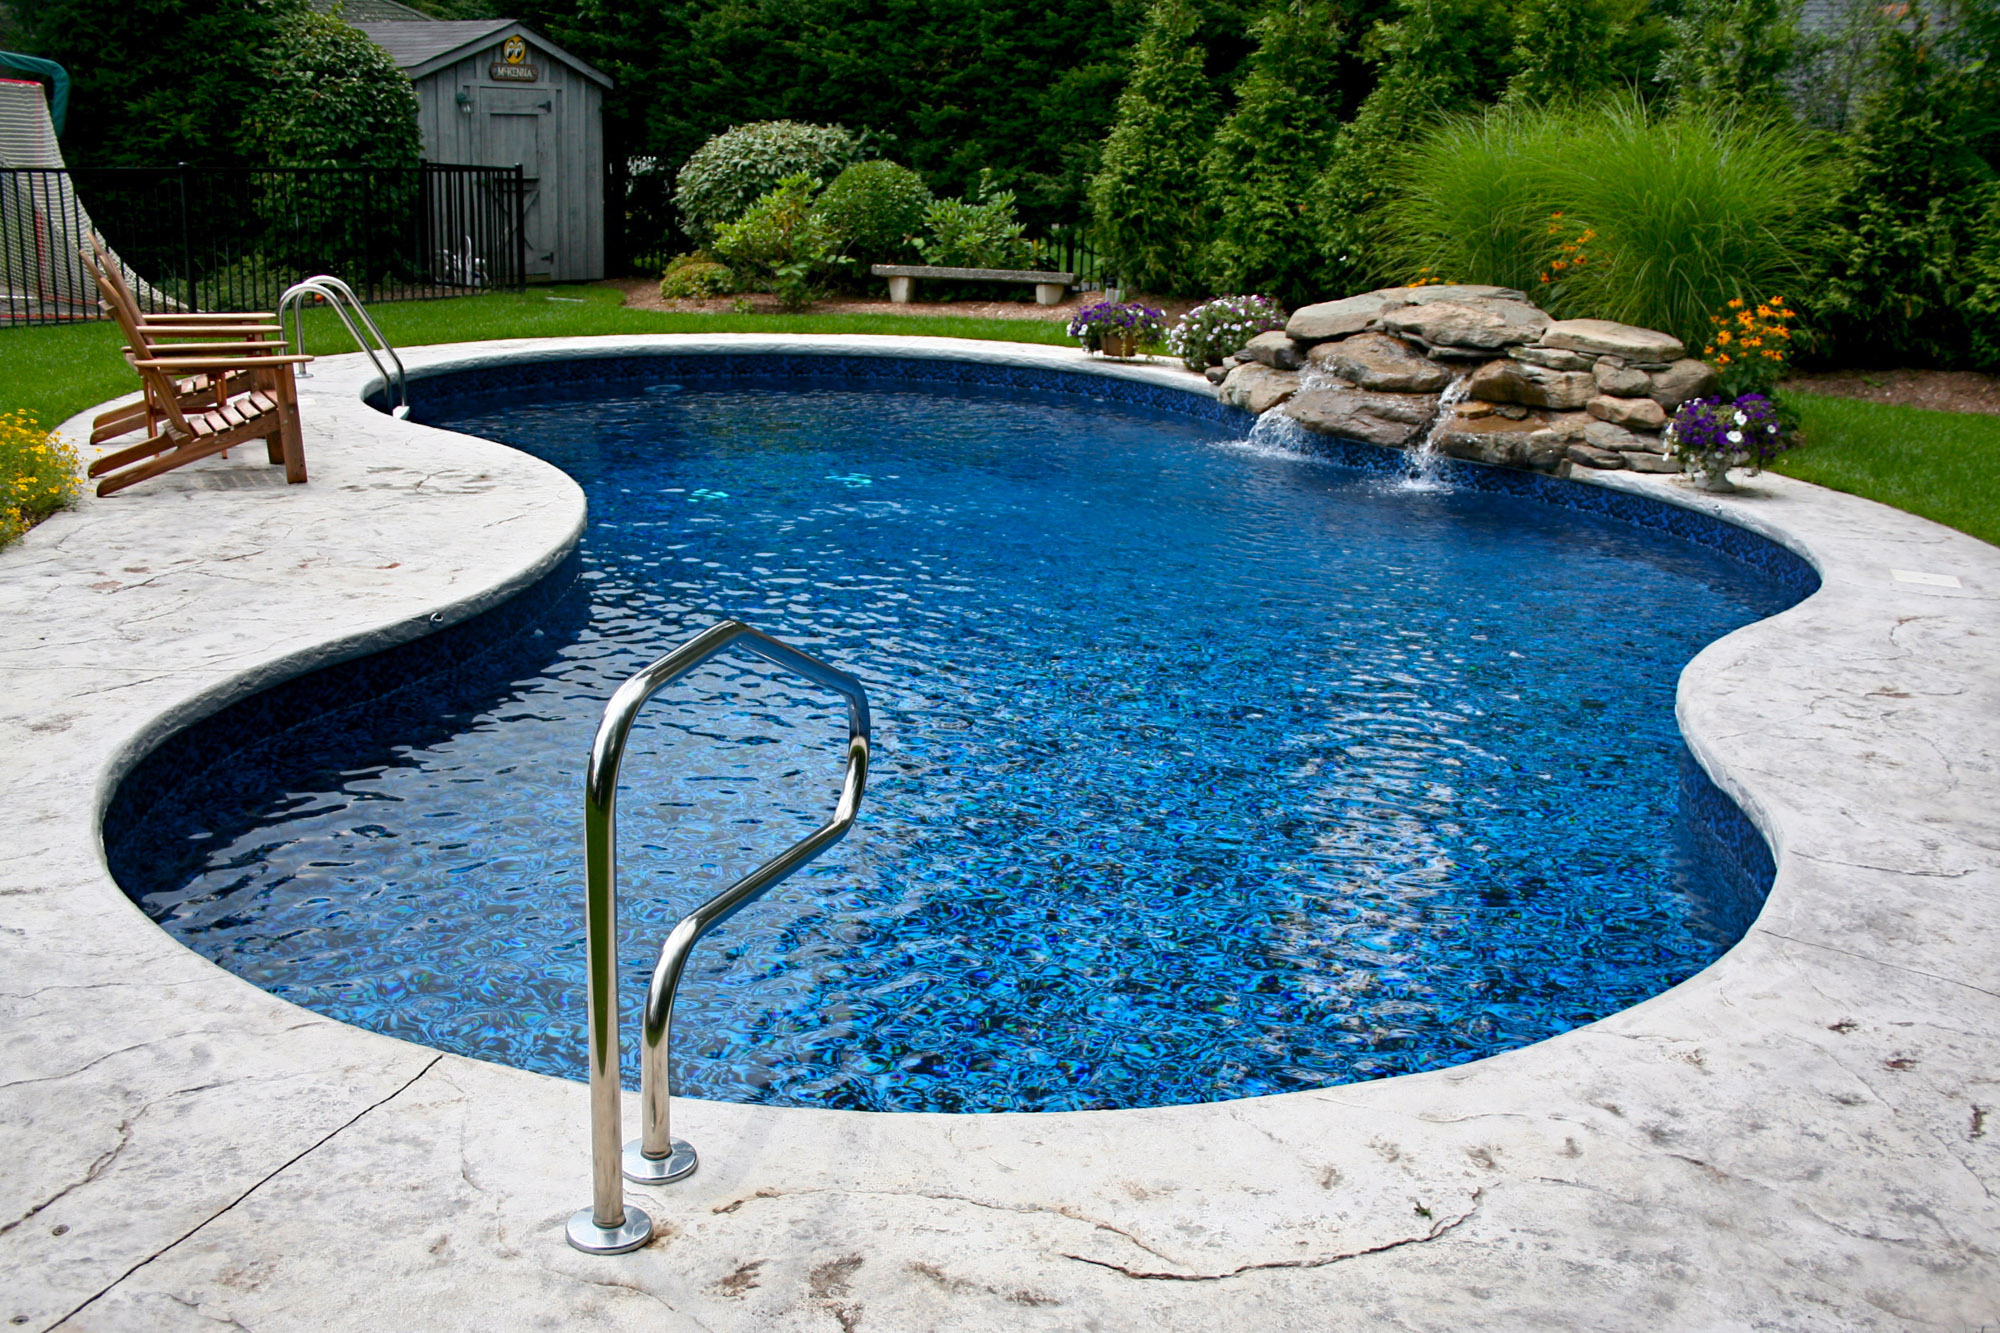 Masterson Pools | Pool Builder Bergen County